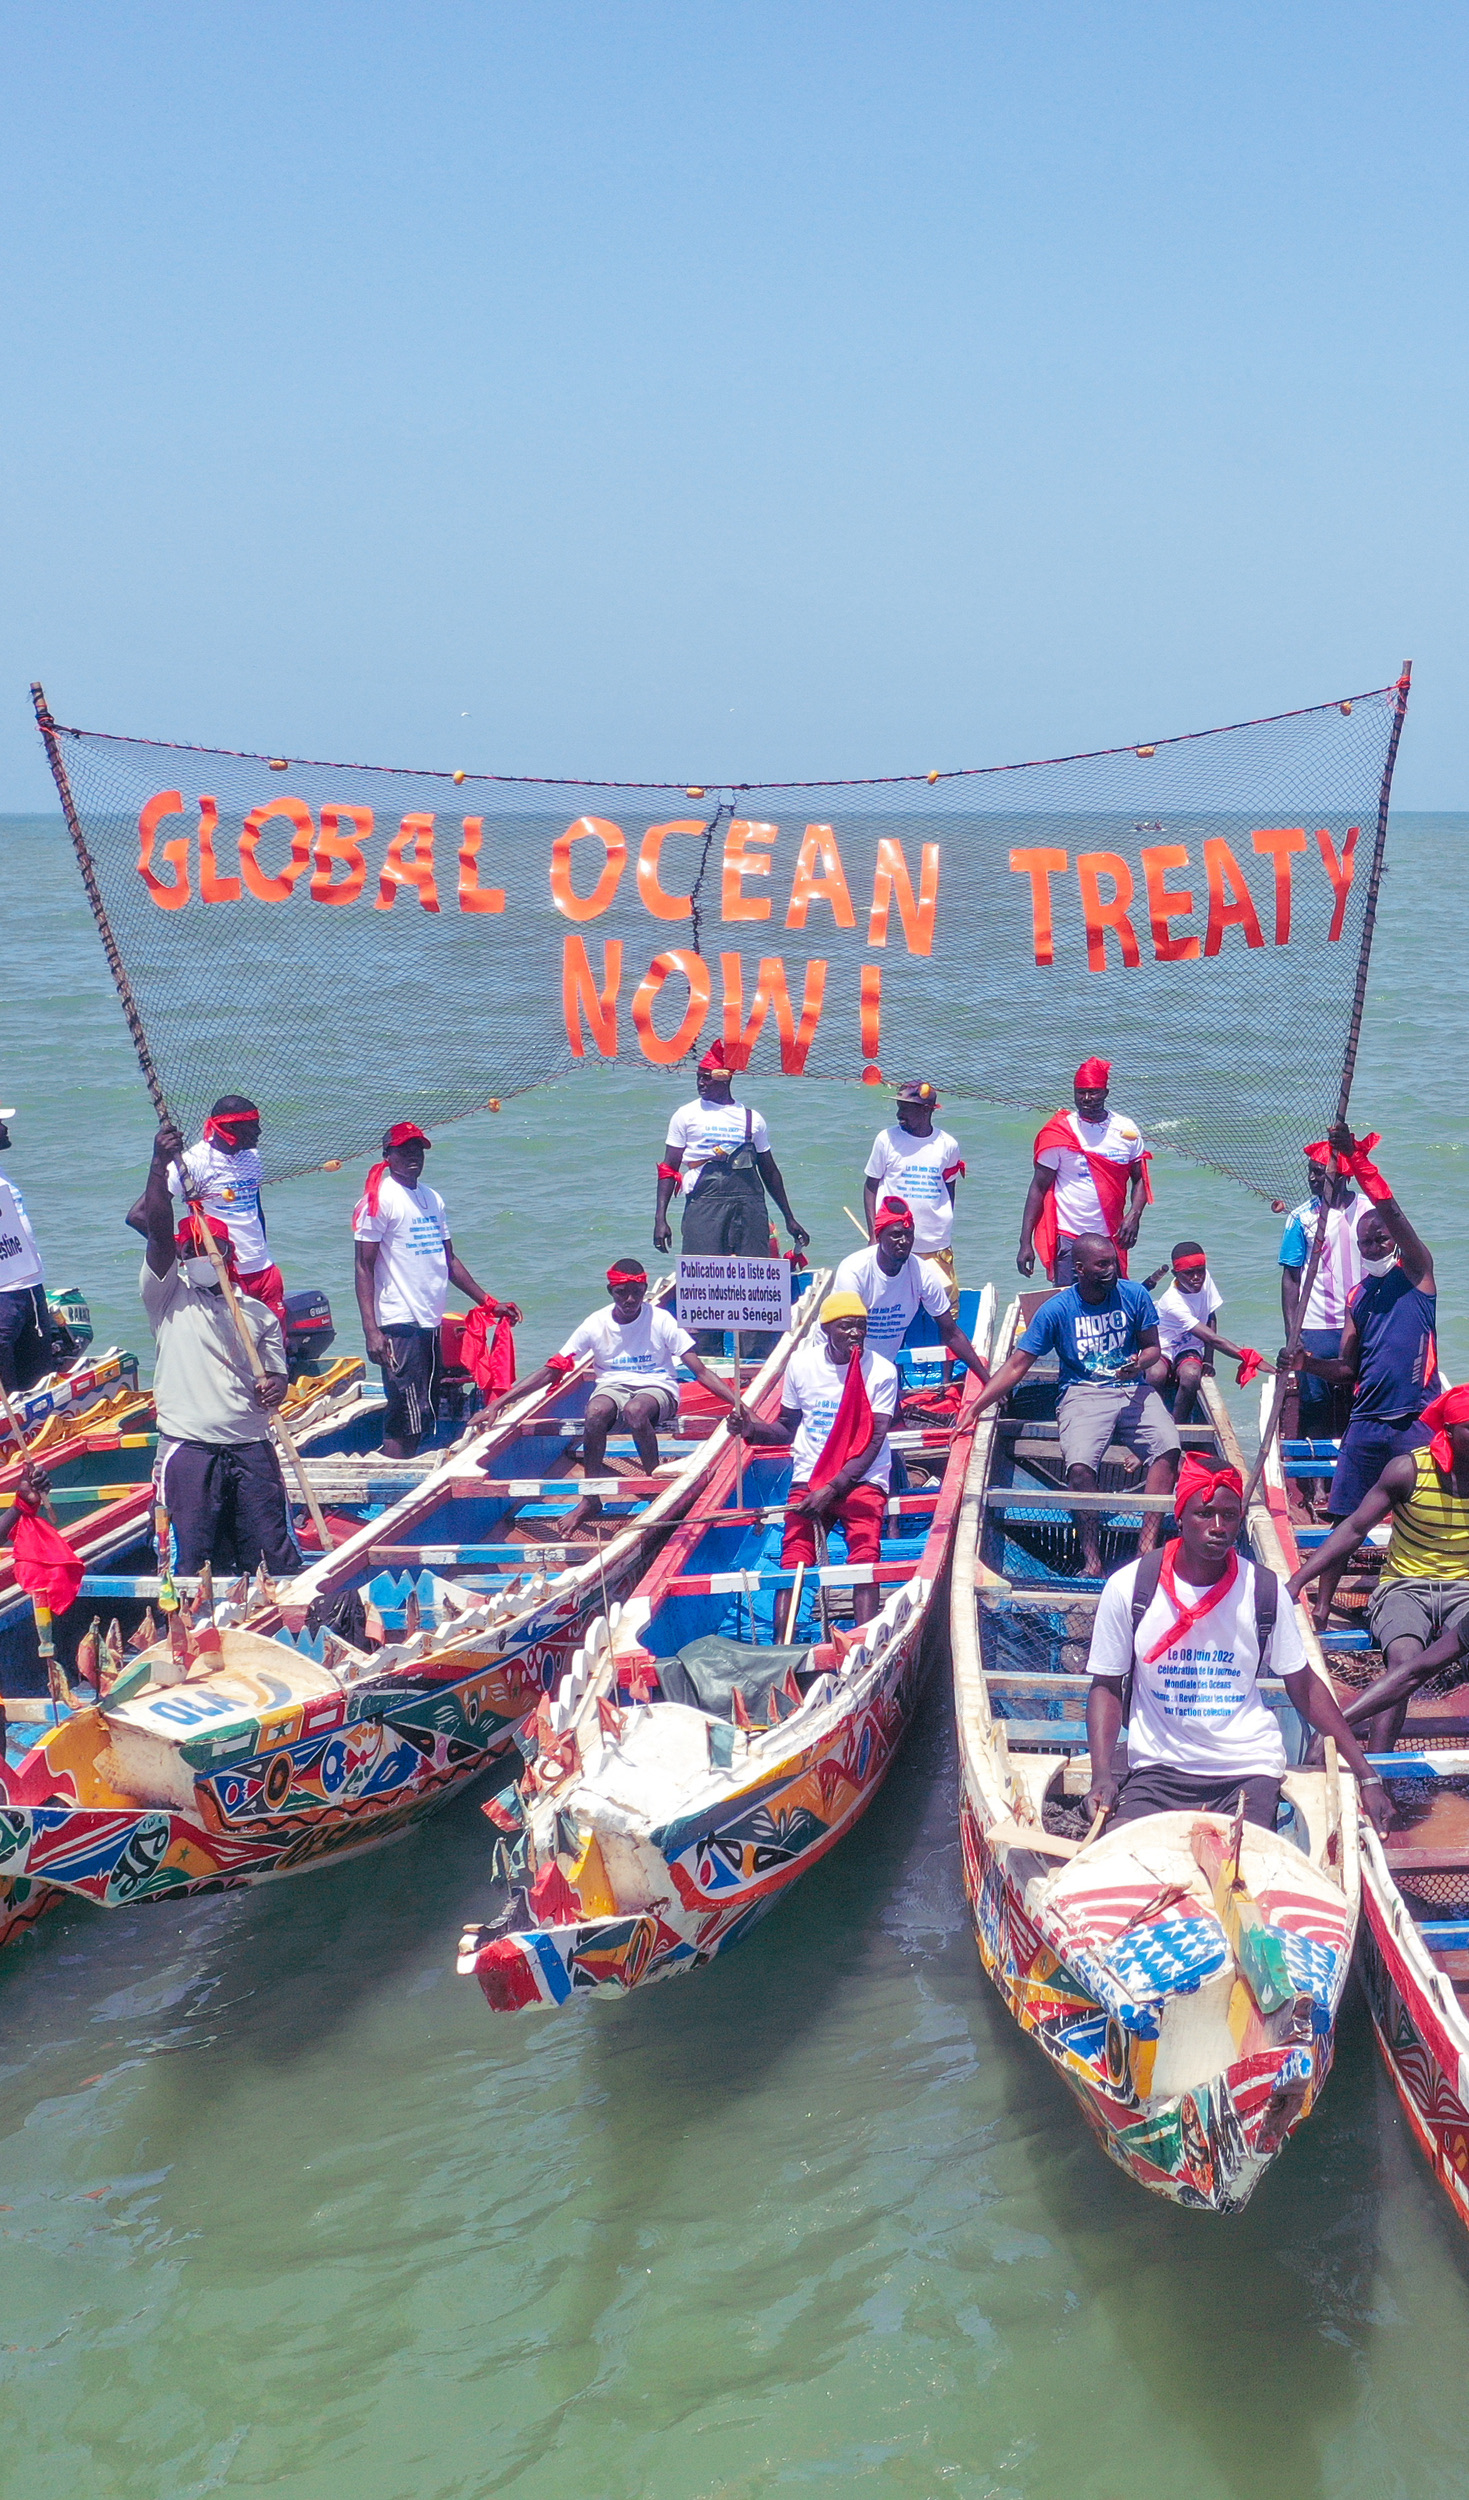 People stand on brightly painted traditional Senegalese fishing boats. A banner between the boats reads Global Ocean Treaty Now.